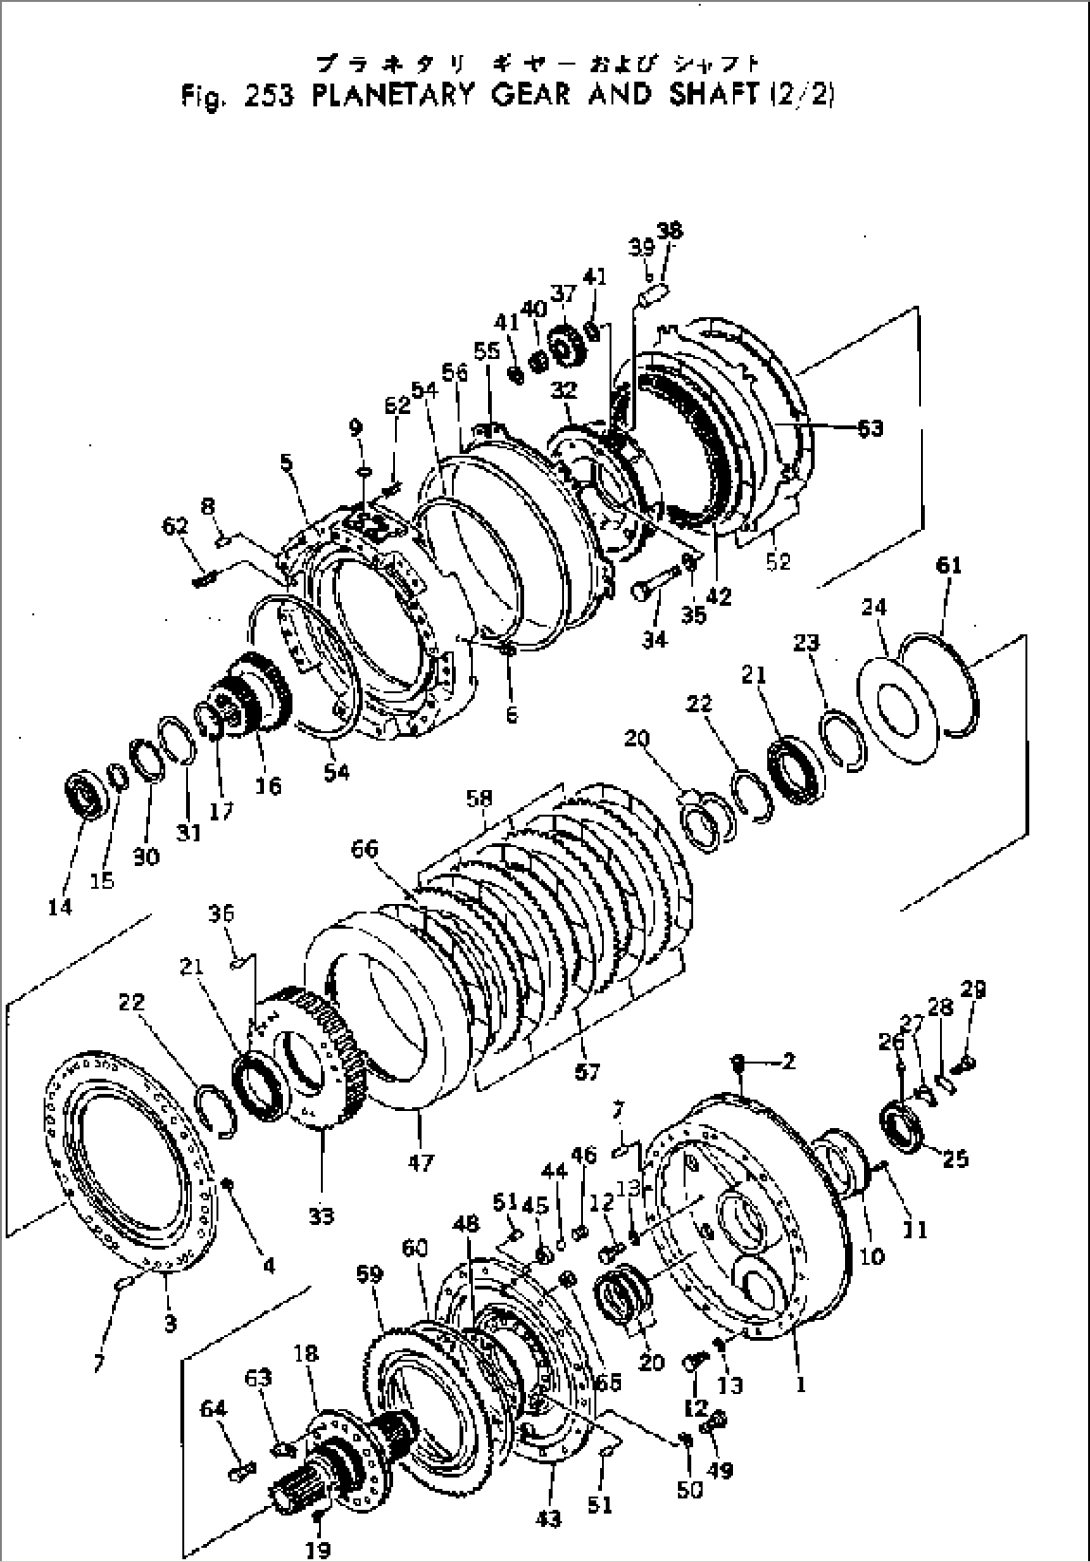 PLANETARY GEAR AND SHAFT (2/2)